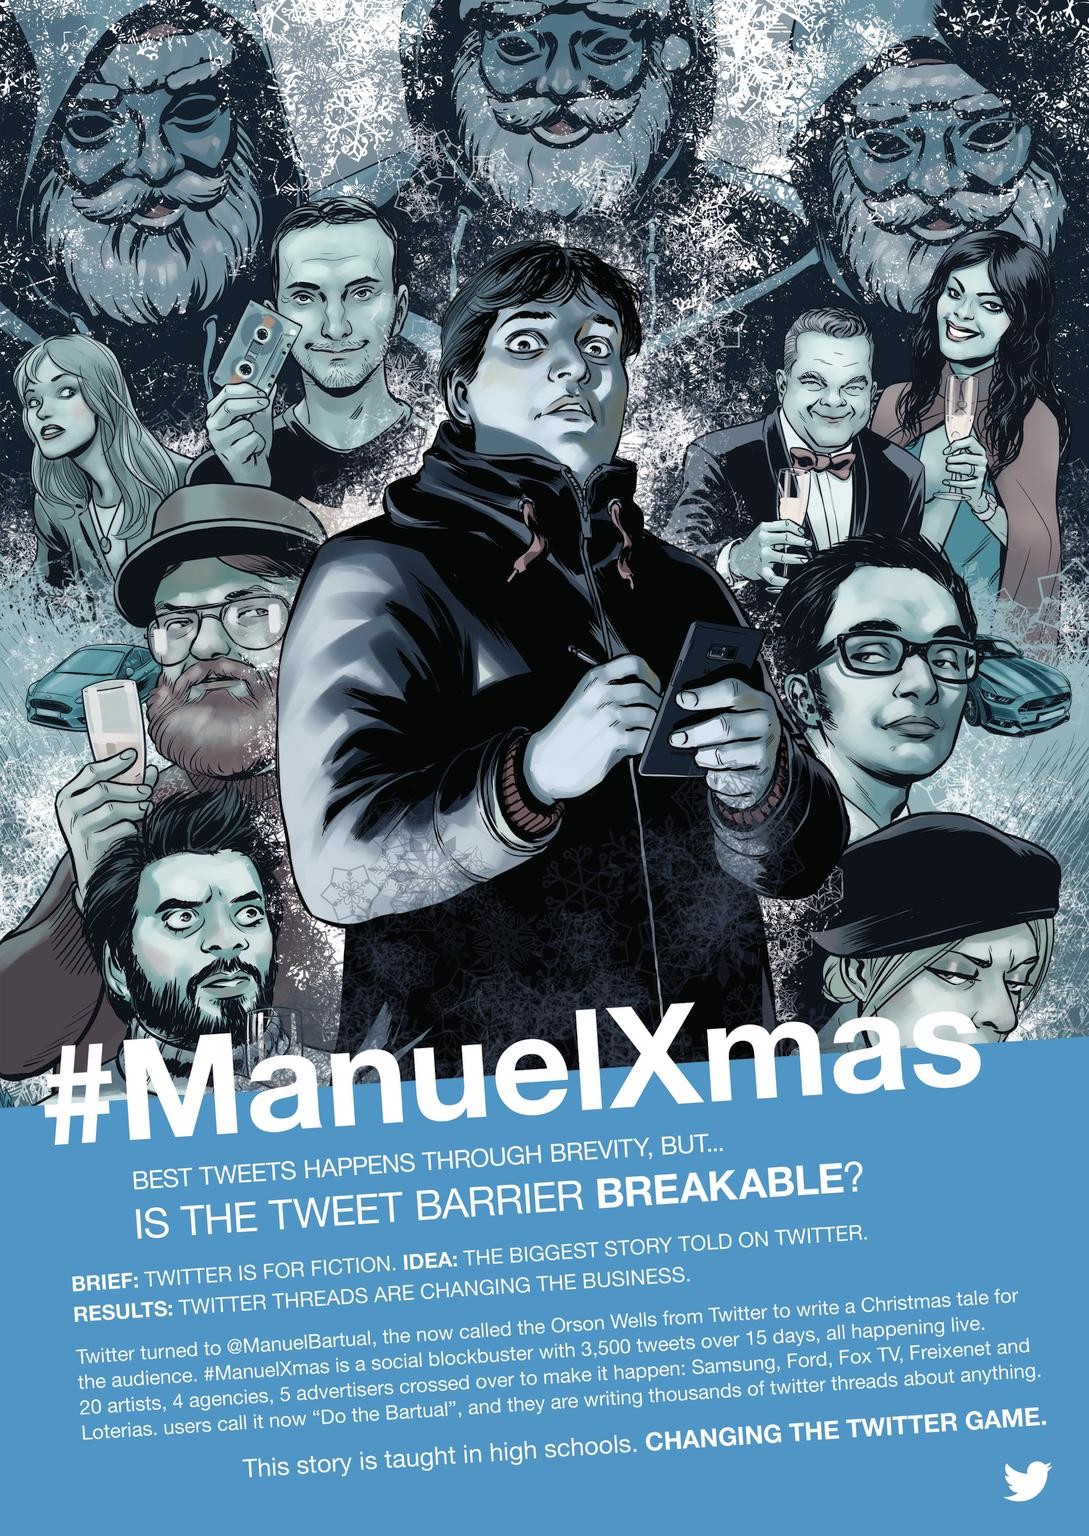 #ManuelXmas. The biggest story told on Twitter